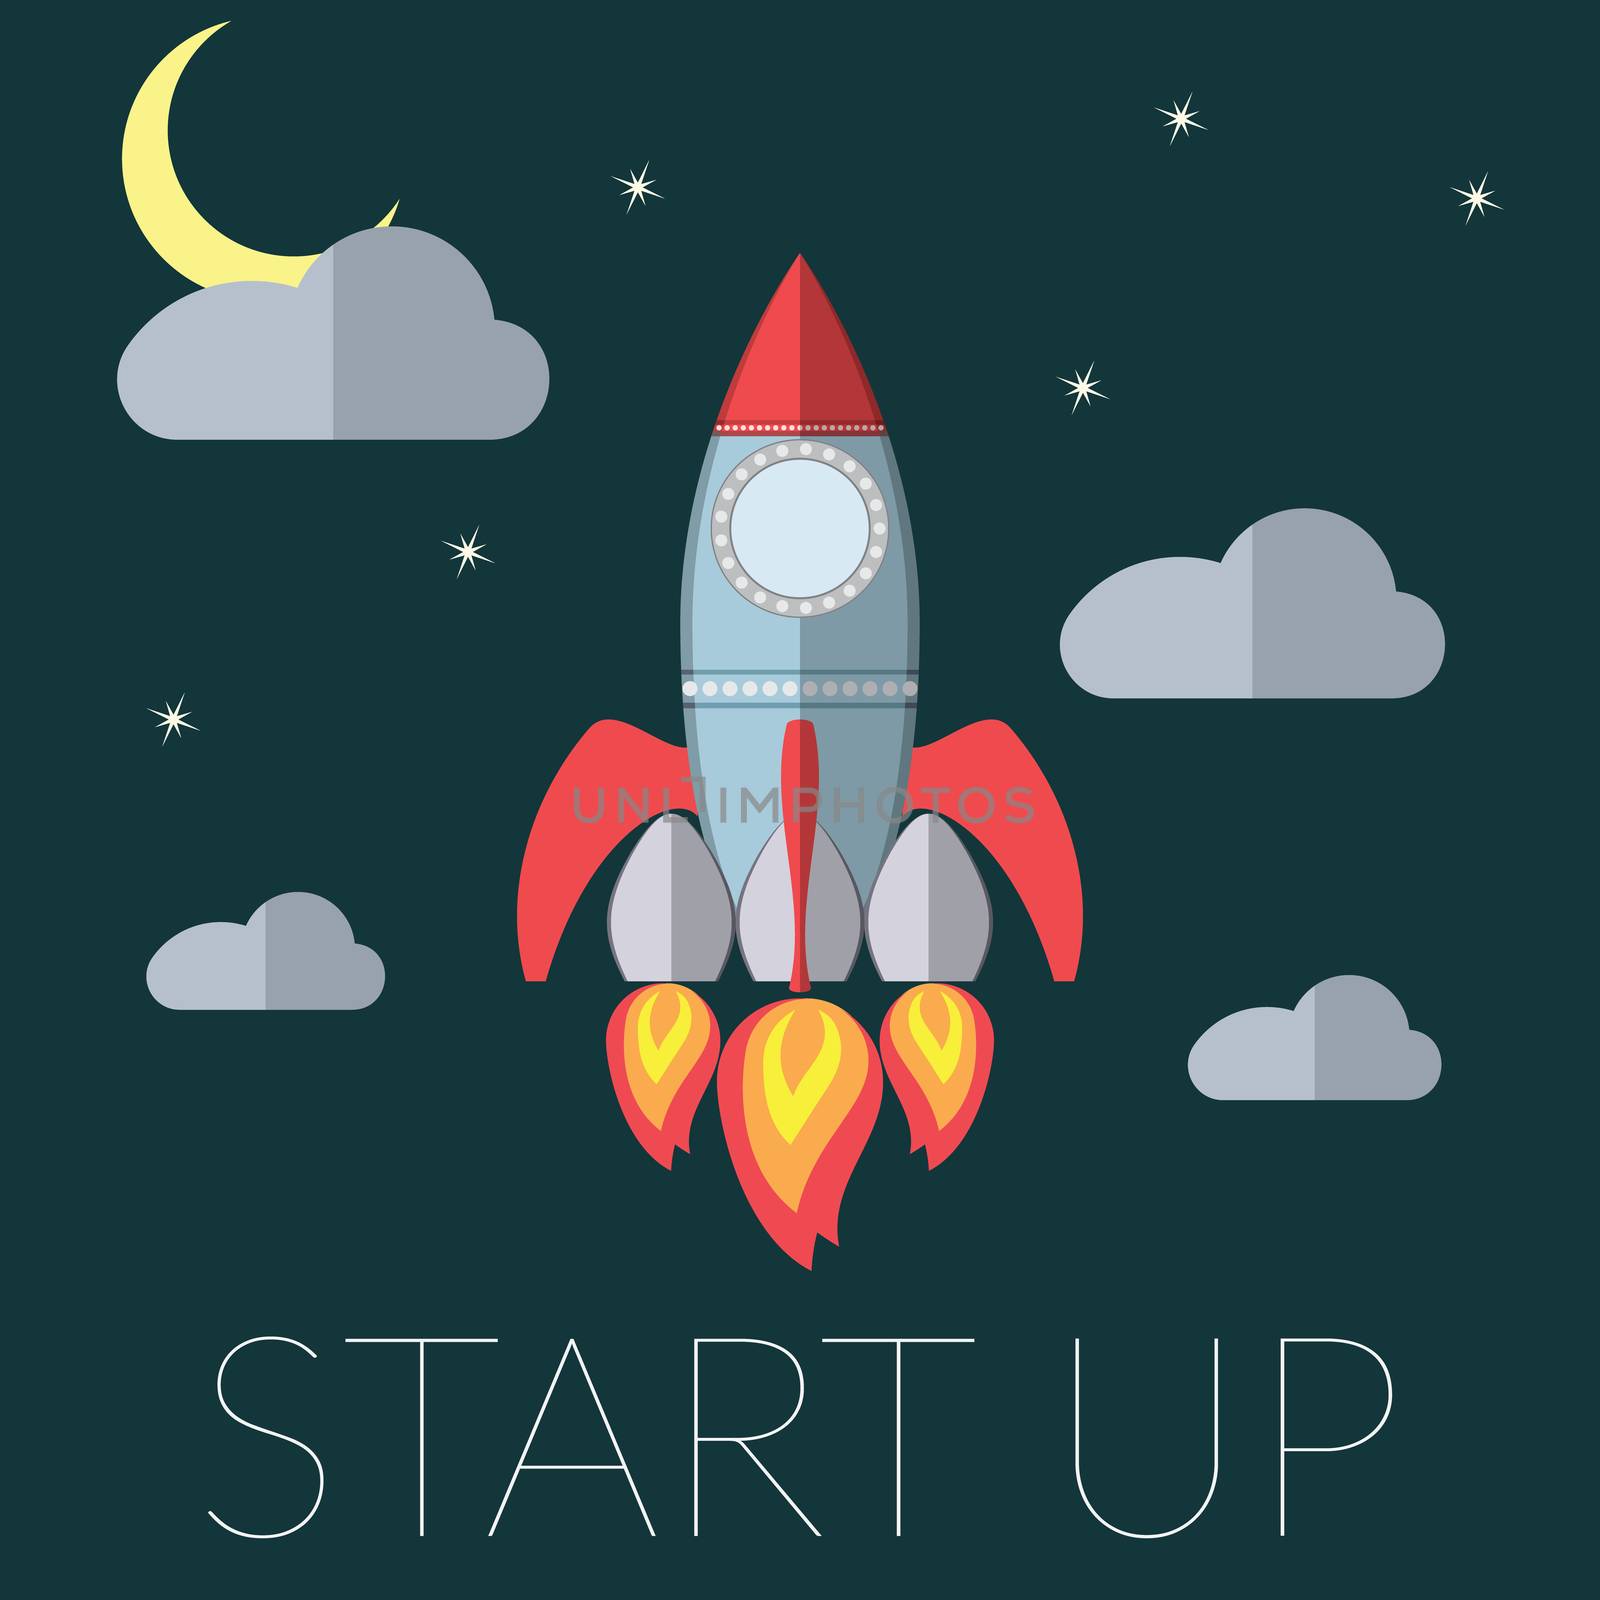 Flat design modern vector illustration of a rocket concept for new business project startup, launching new innovation product, creative start on market by Lemon_workshop